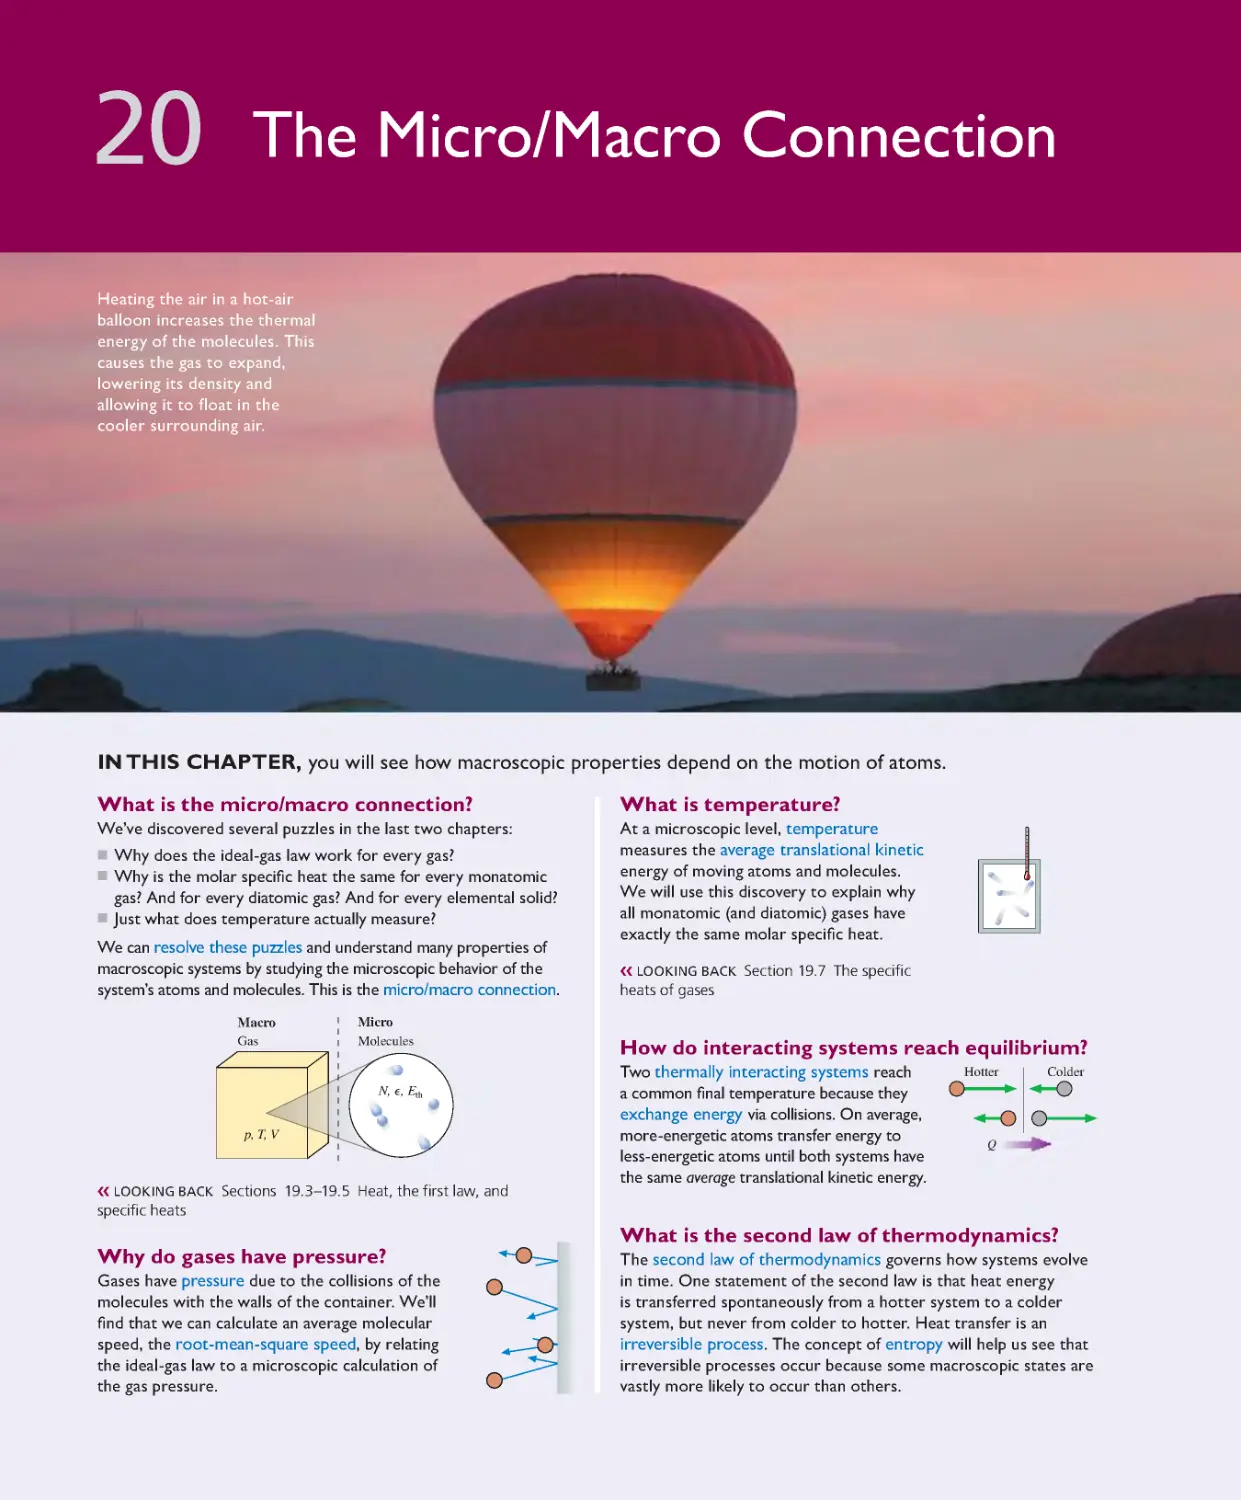 Chapter 20: The Micro/Macro Connection